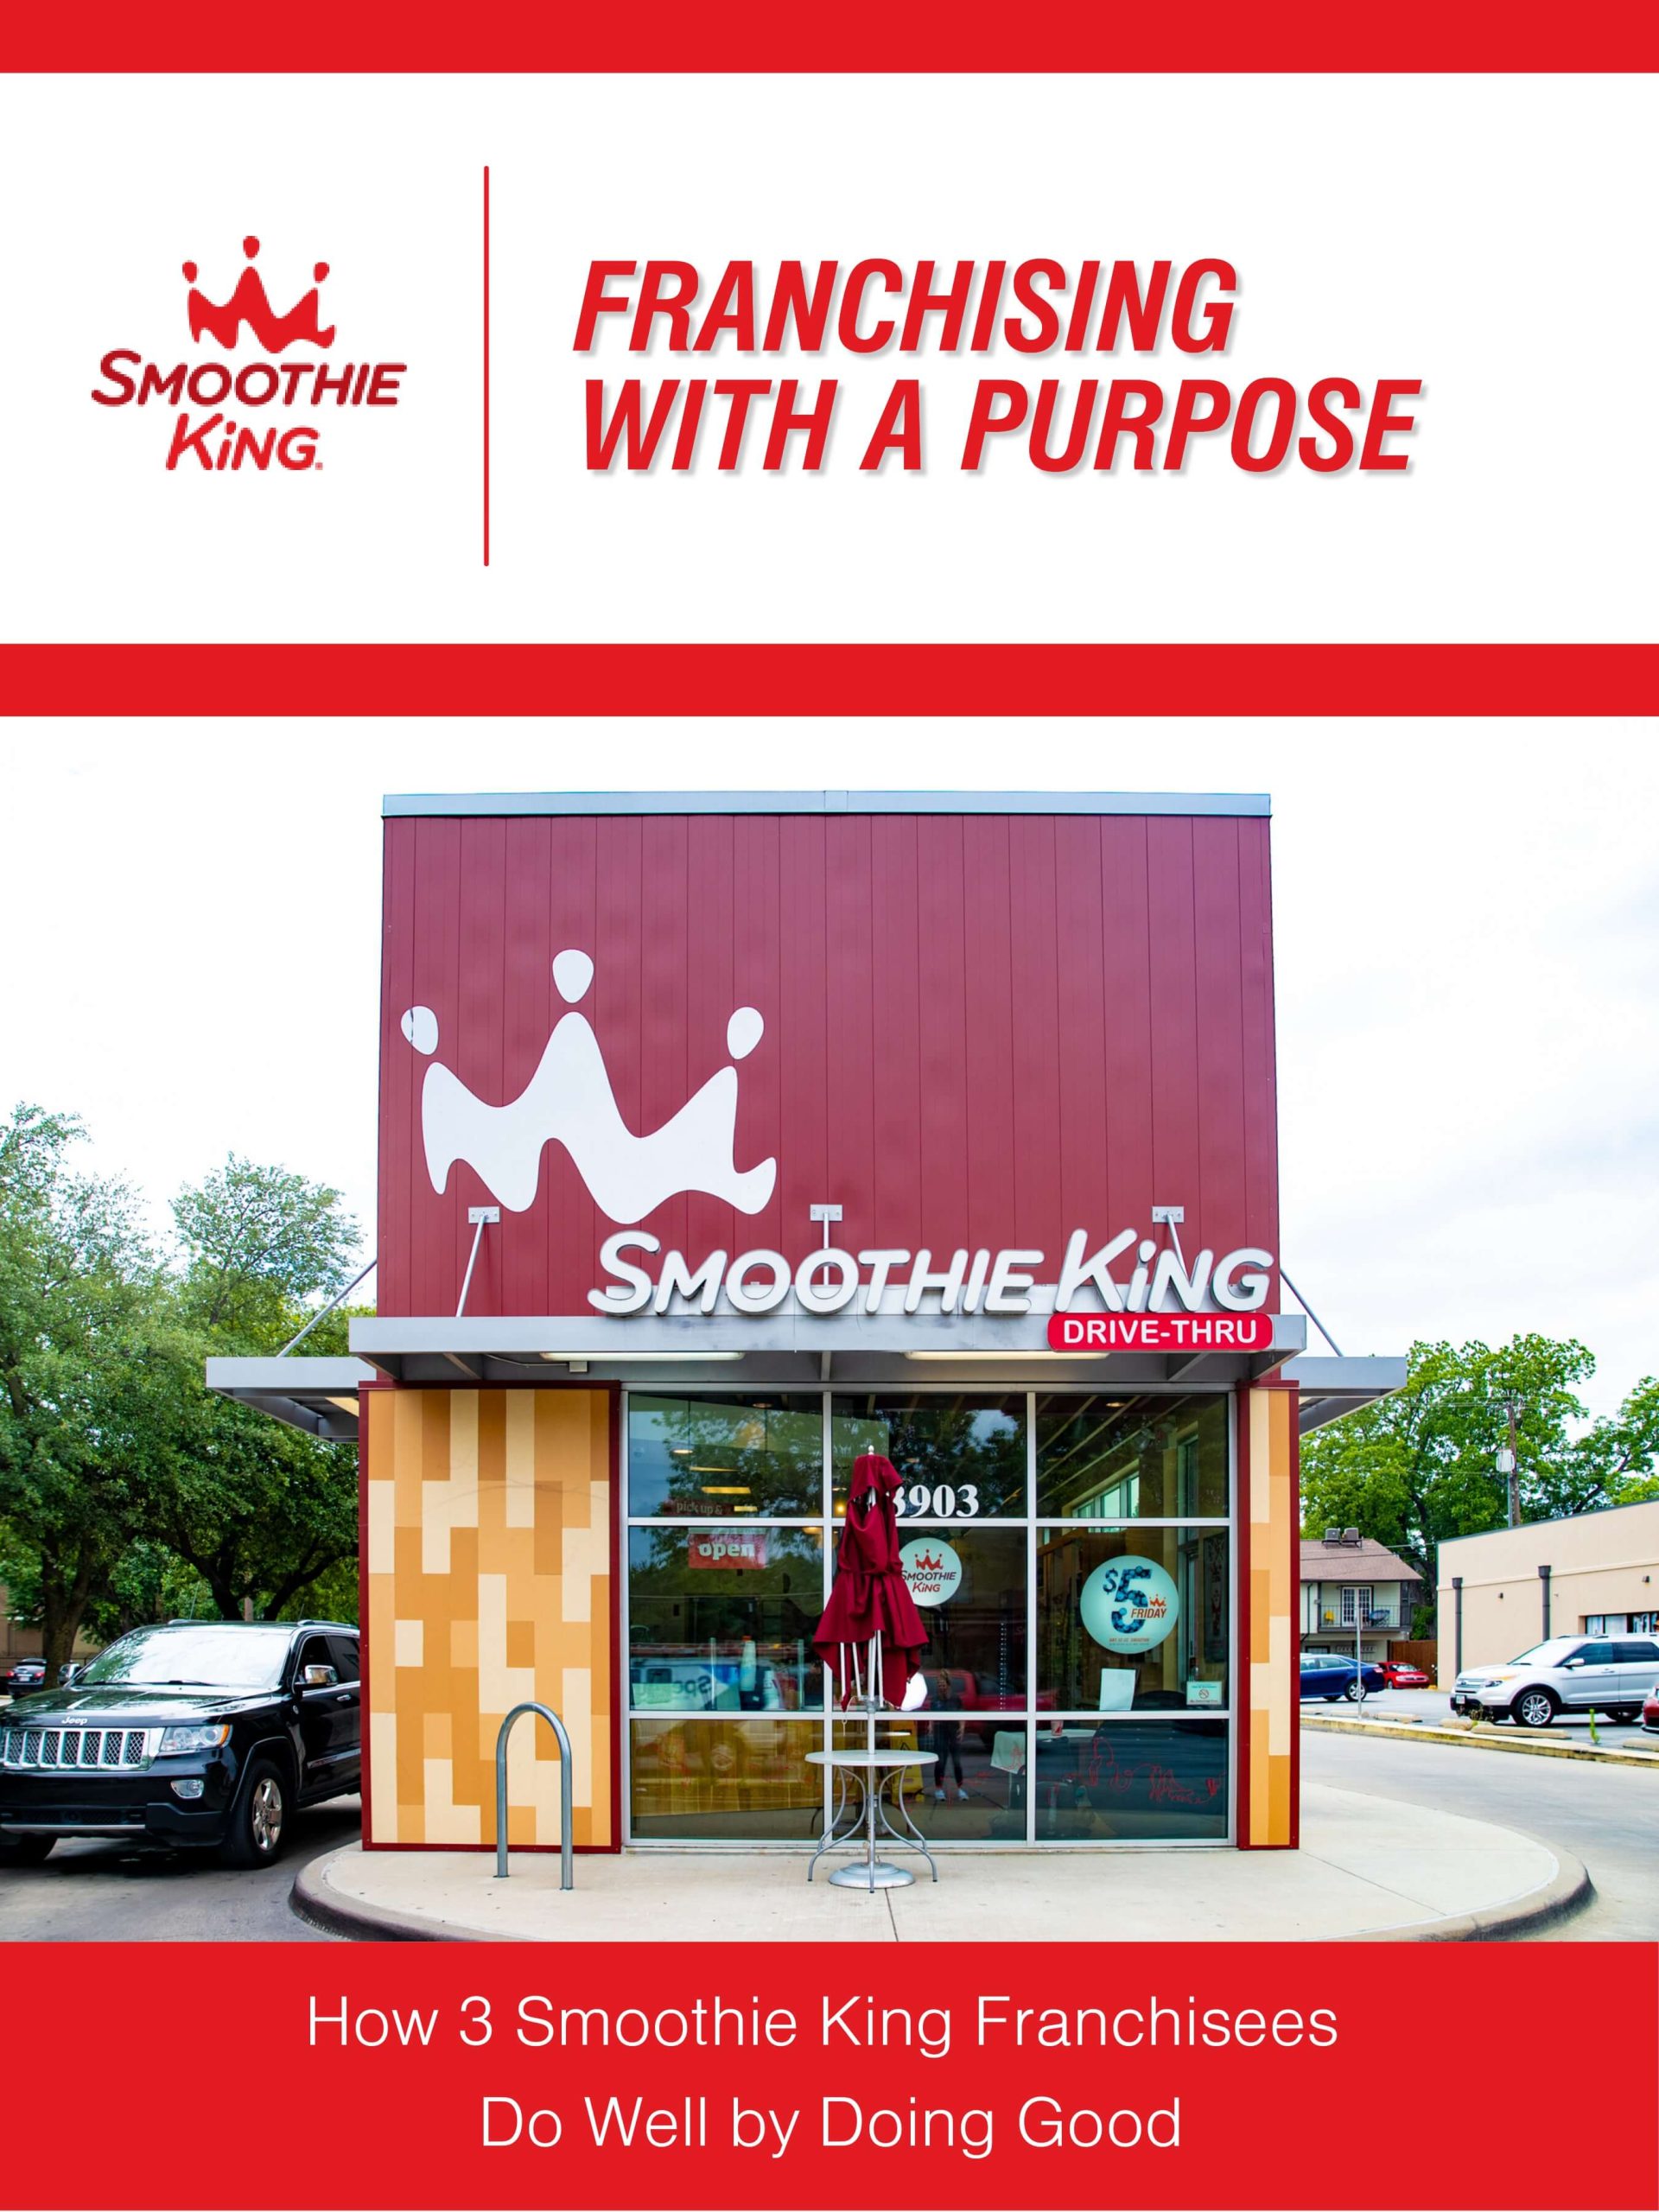 How 3 Smoothie King Franchisees do well by doing good